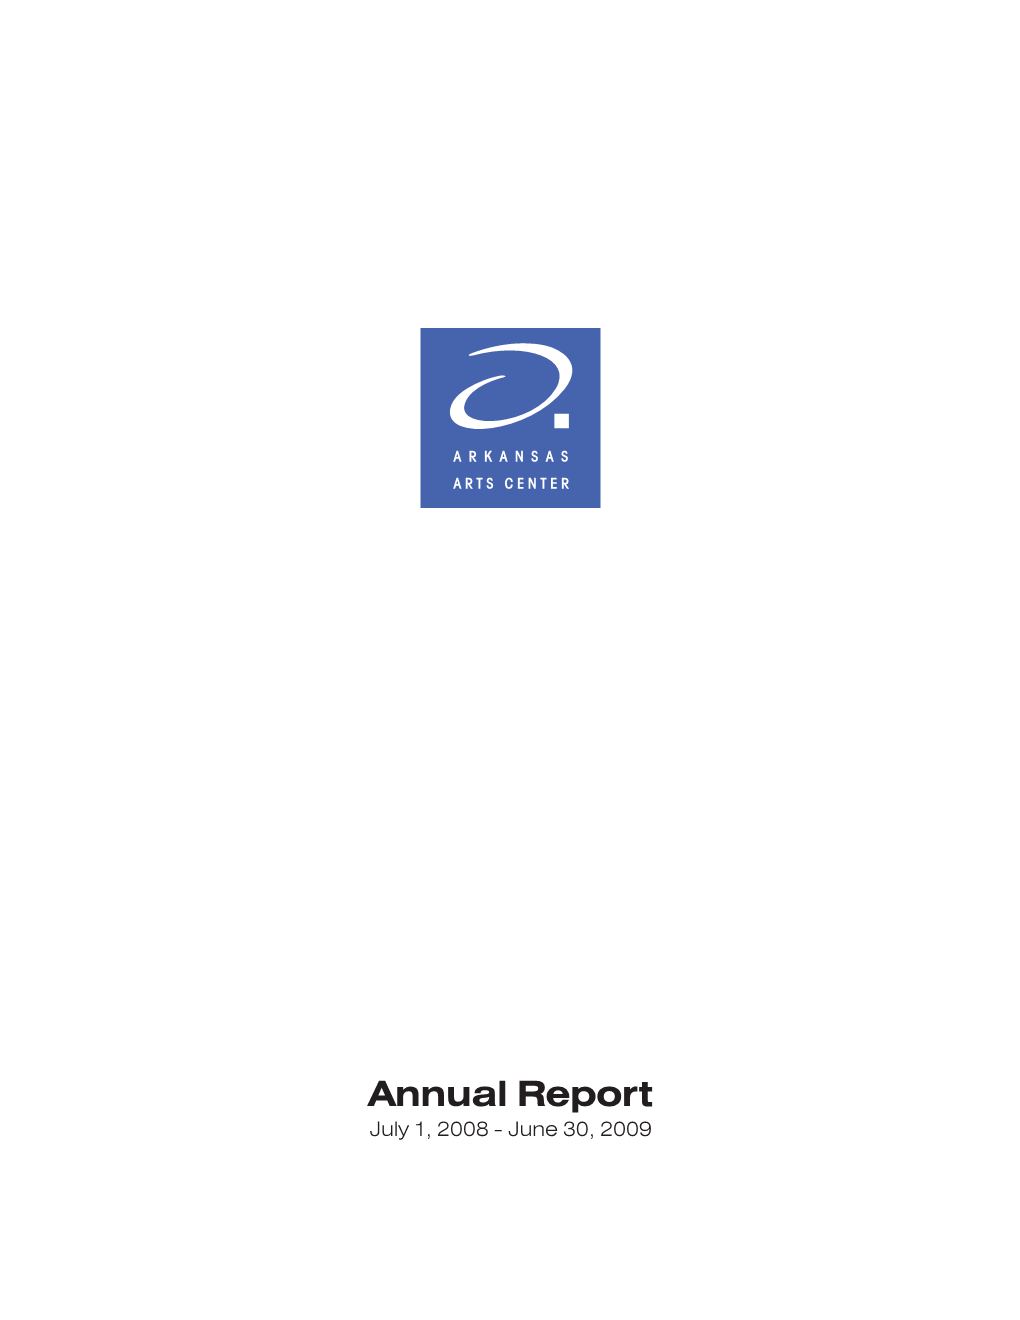 Fiscal Year 2008-2009 Annual Report